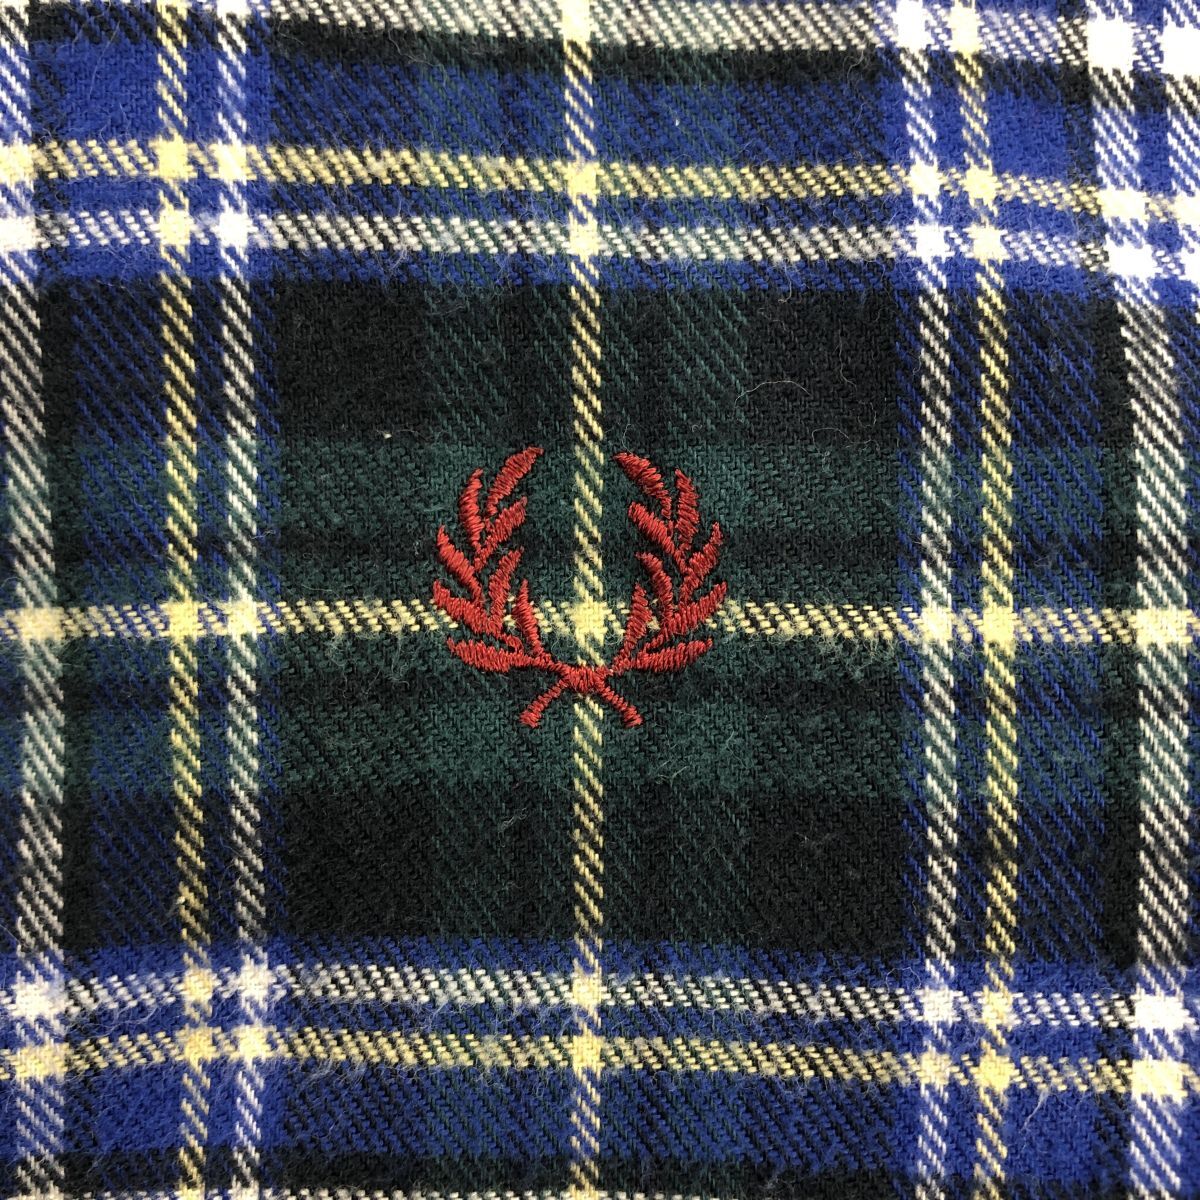 A922-U*FRED PERRY Fred Perry shirt long sleeve long shirt embroidery Logo check pattern casual trad piling put on *size S blue group cotton 100%